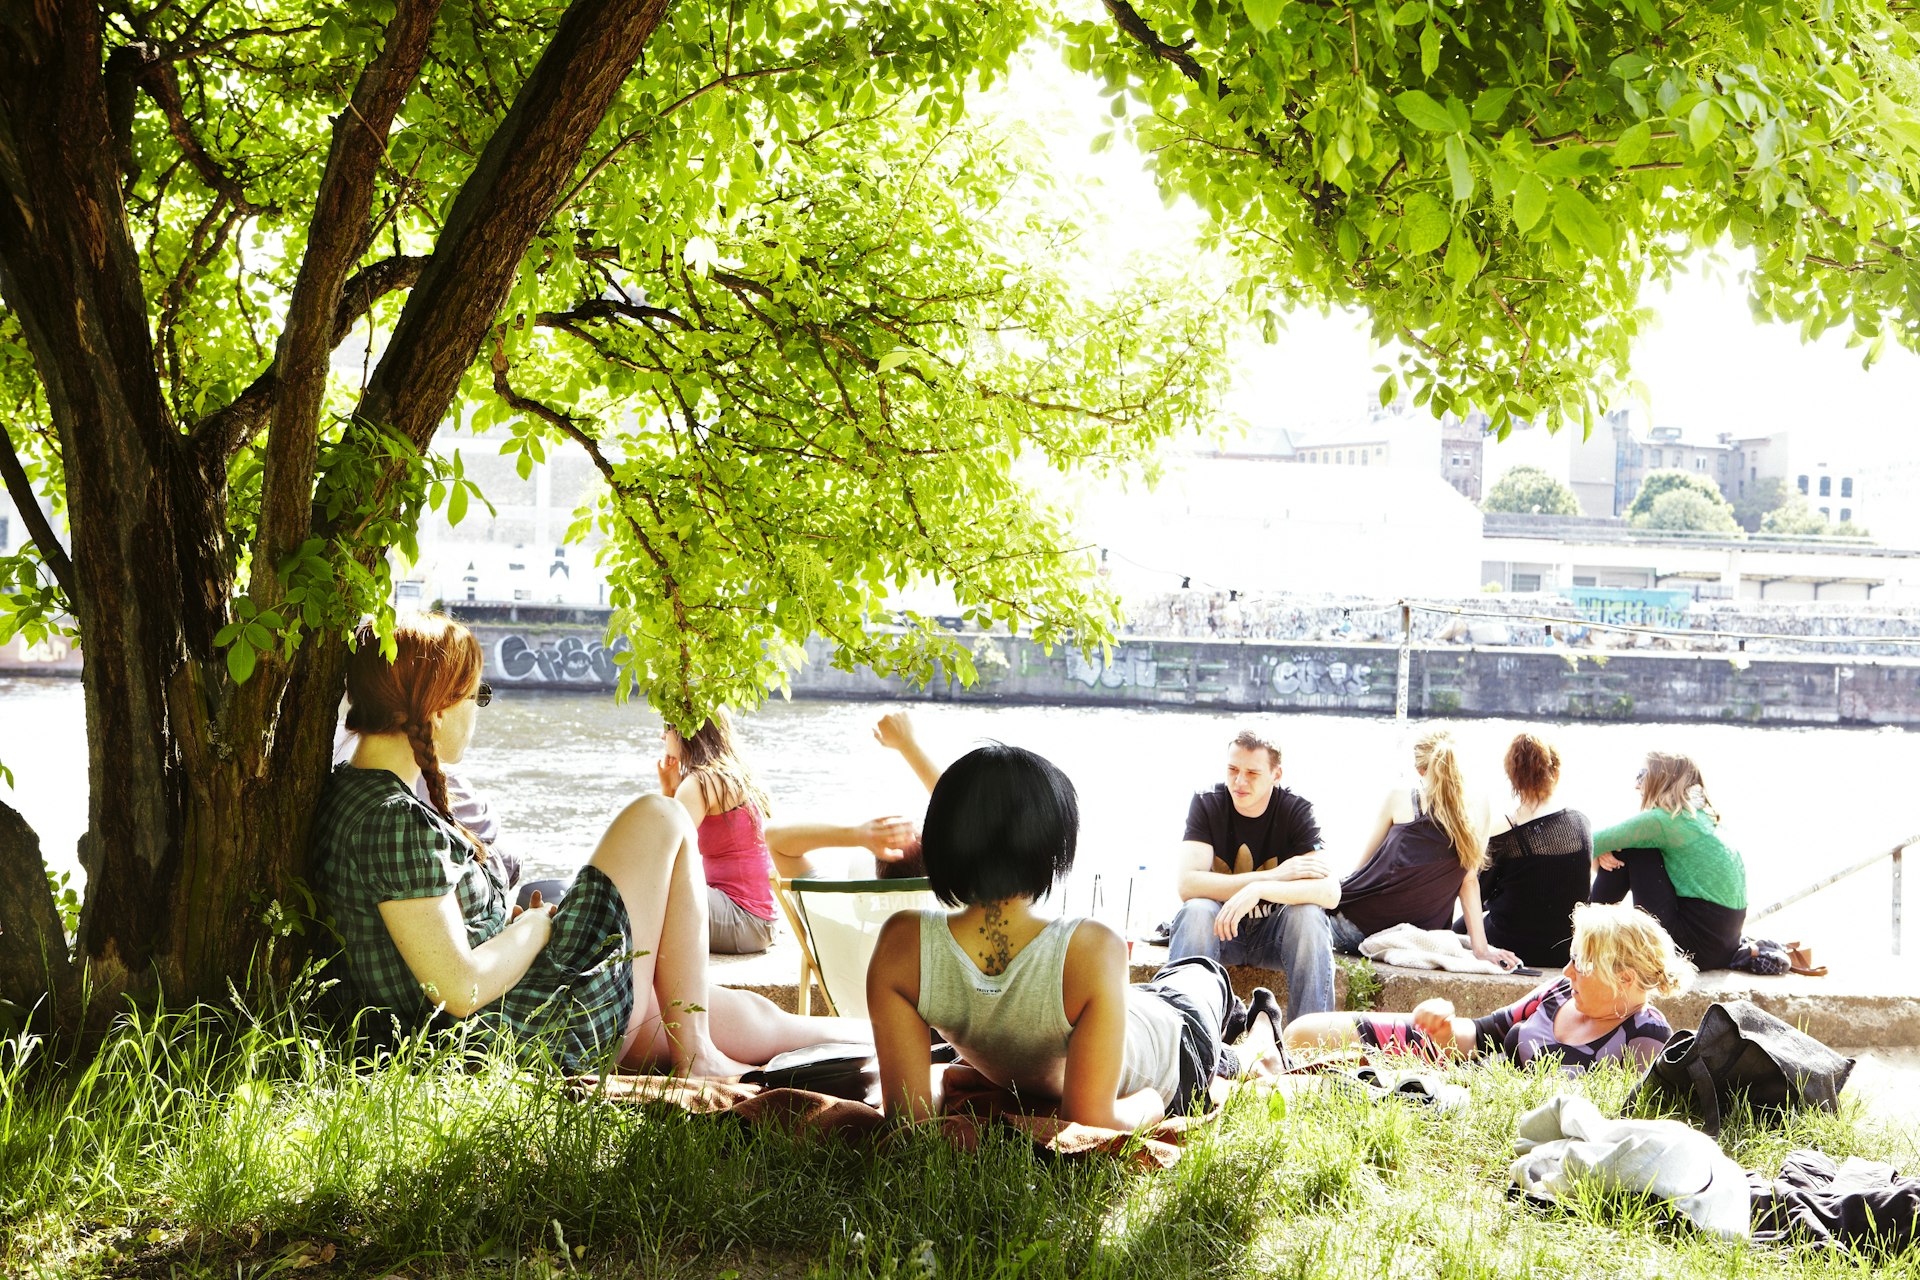 A group of people are lounging under a tree in a park on the banks of the Spree River in Berlin on a sunny day.